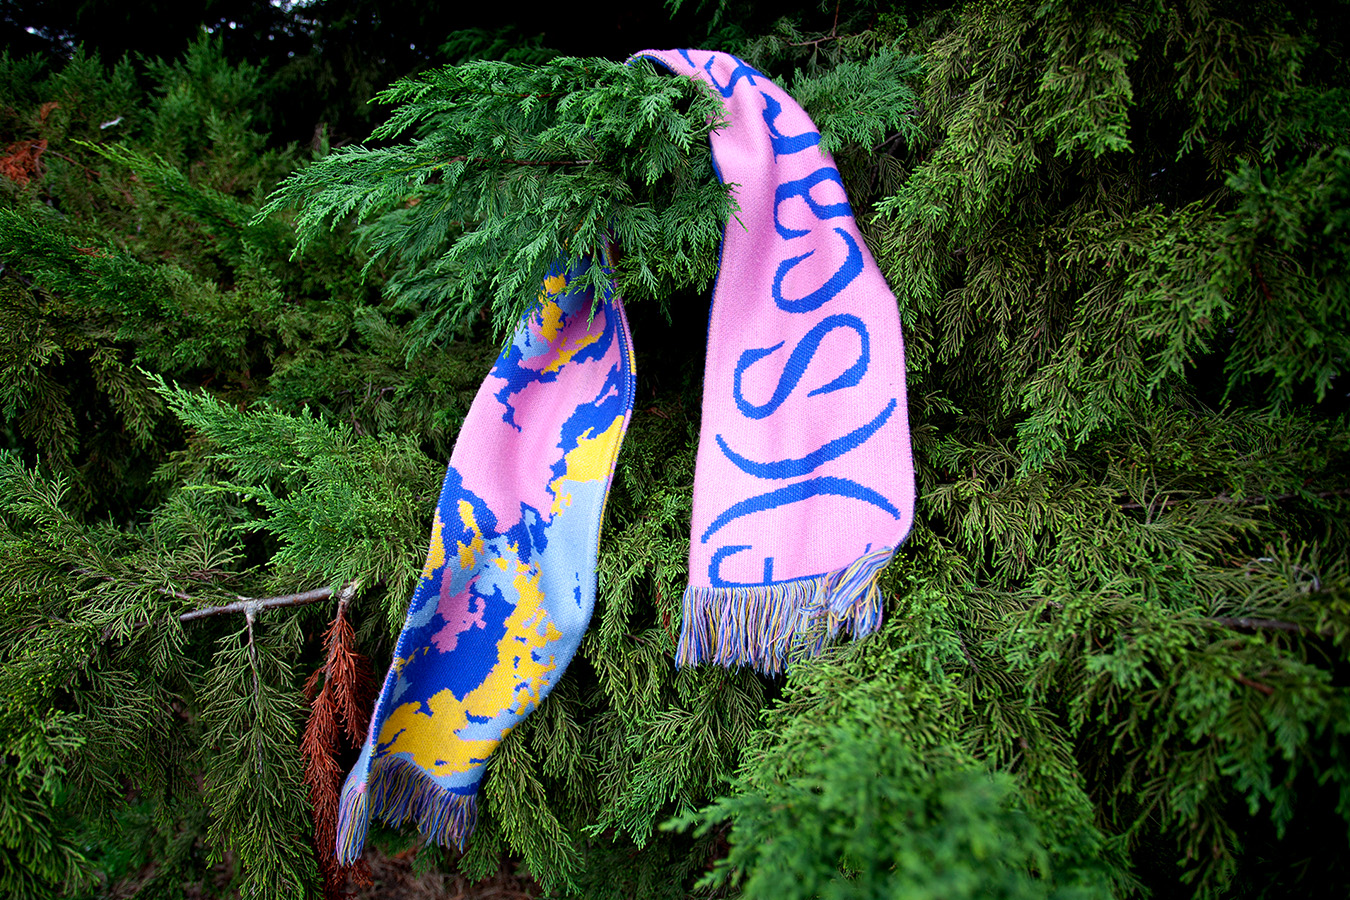 A scarf produced as part of the iiii project, in this image the scarf is hanging from the branch of a tree. The scarf is based around iiii's ability to be self-aware, the scarf has the word scarf written on it multiple times, sitting on top of bright colours and textures that make the scarf desirable to members of the public